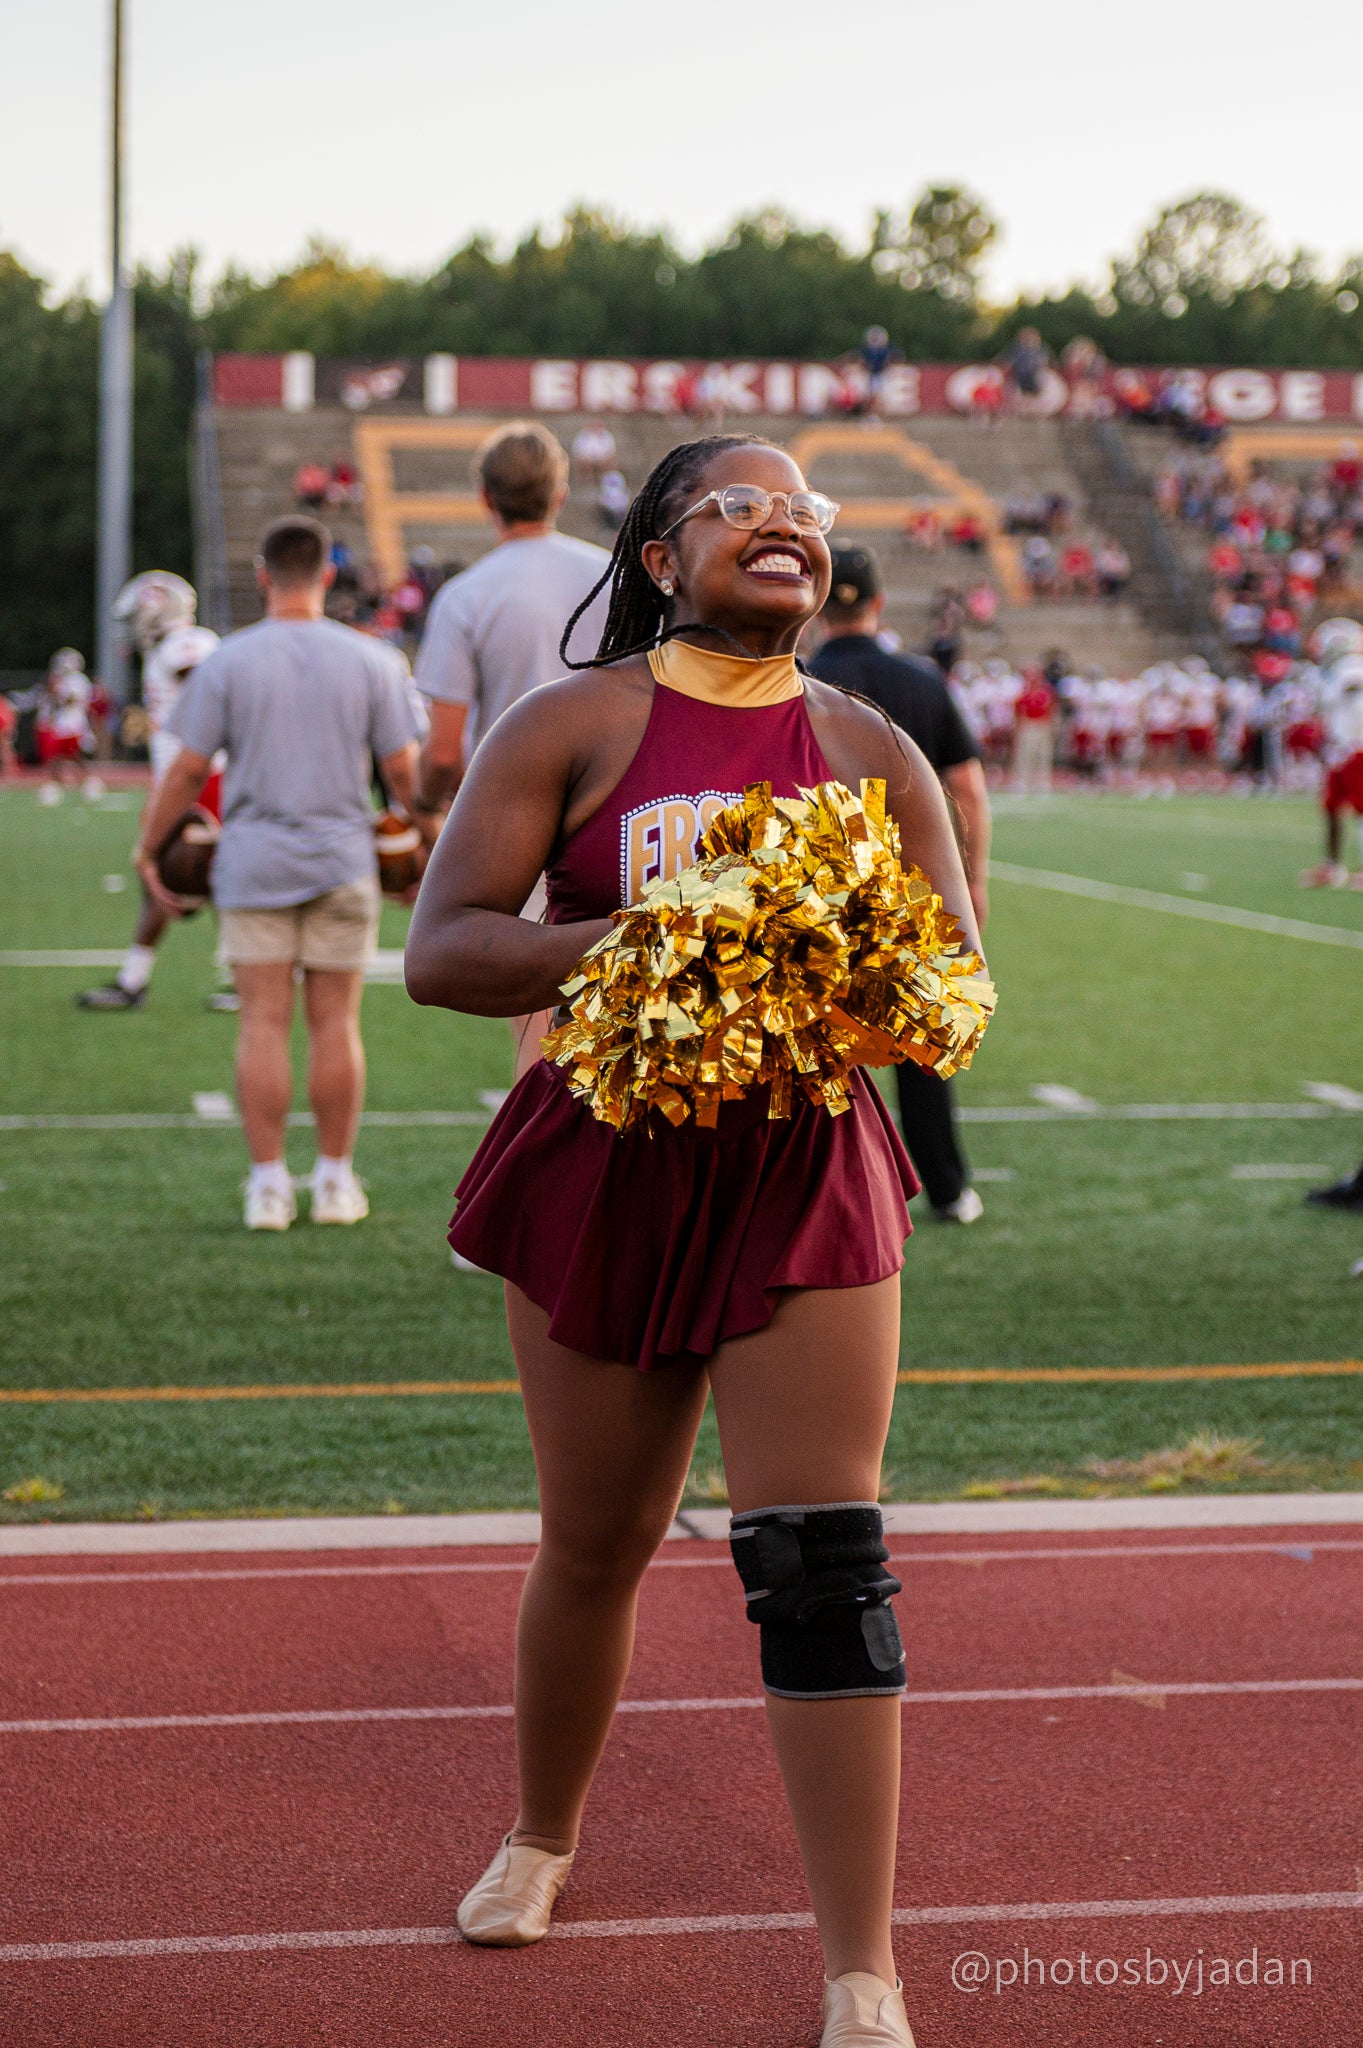 A member of the Erskine cheer team